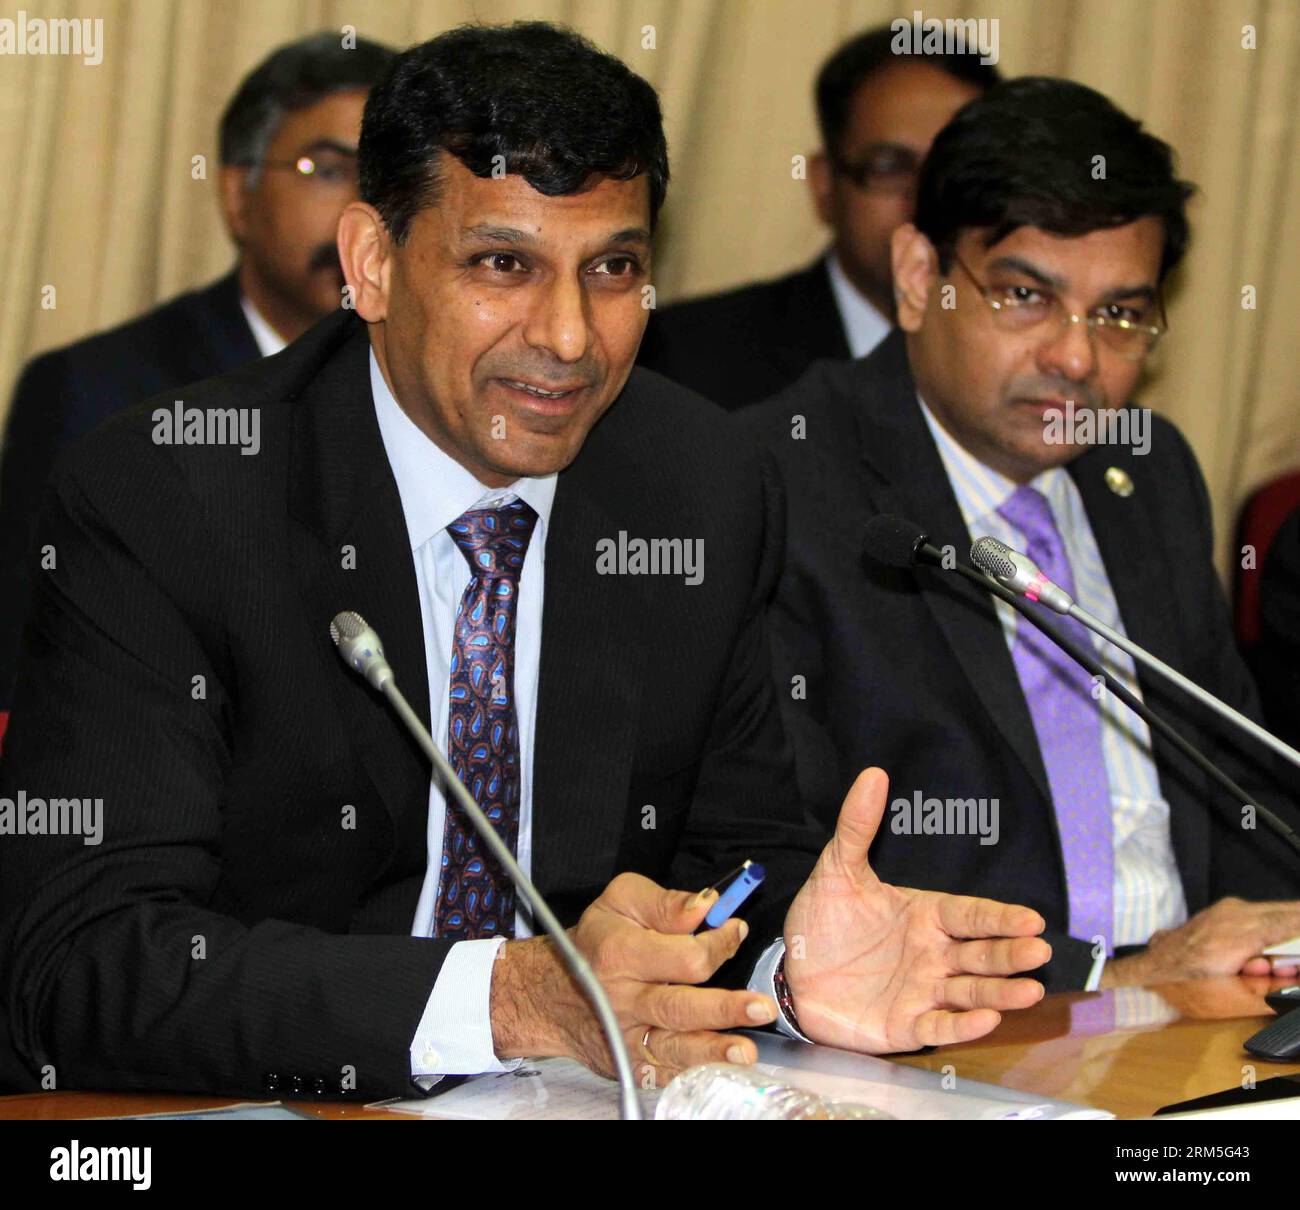 Bildnummer: 60651388  Datum: 29.10.2013  Copyright: imago/Xinhua (131029) -- MUMBAI, Oct. 29, 2013 (Xinhua) -- Governor of the Reserve Bank of India (RBI) Raghuram Rajan addresses the second quarter review of the monetary policy for 2013-14 at the RBI headquarters in Mumbai, India, Oct. 29, 2013. India s central bank, the Reserve Bank of India, Tuesday hiked a key policy interest rate by 0.25 percent in less than two months to curb inflation and slumping of the rupee. (Xinhua/Stringer)(lrz) INDIA-MUMBAI-BANK-RATE PUBLICATIONxNOTxINxCHN People Wirtschaft xsp x0x 2013 quadrat      60651388 Date Stock Photo